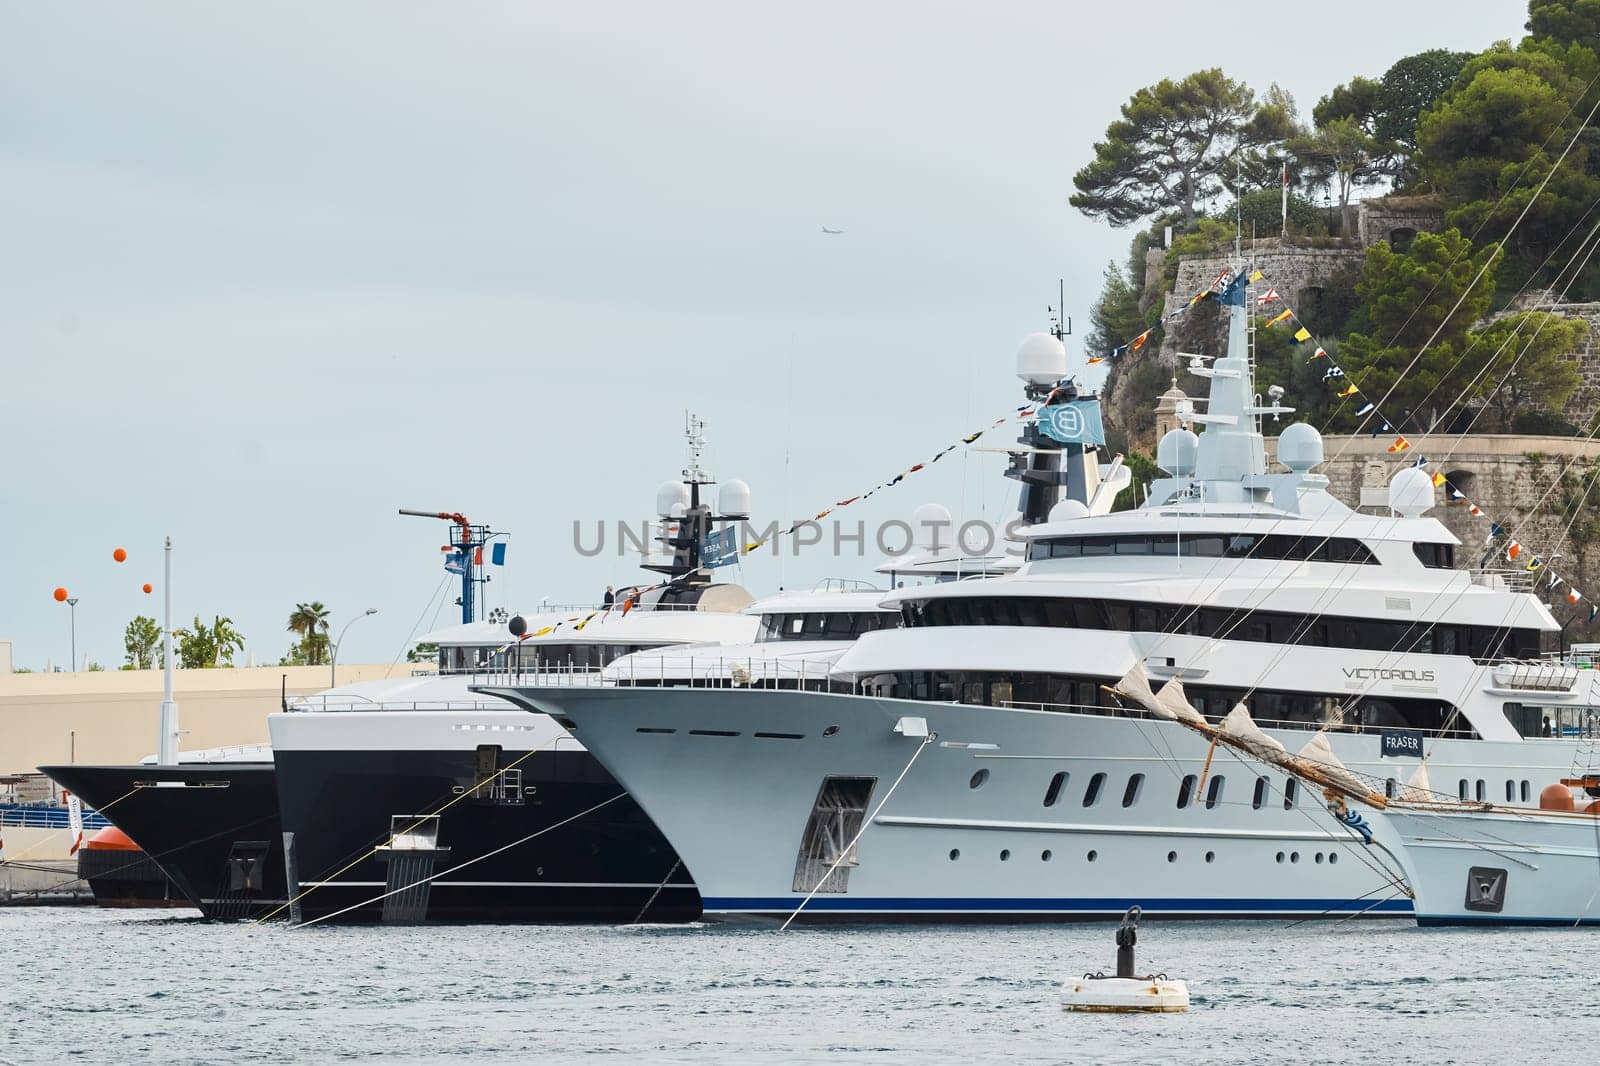 Monaco, Monte Carlo, 29 September 2022 - a lot of luxury yachts at the famous motorboat exhibition at sunset, the most expensive boats for the richest people, yacht brokers, boat traffic. High quality photo